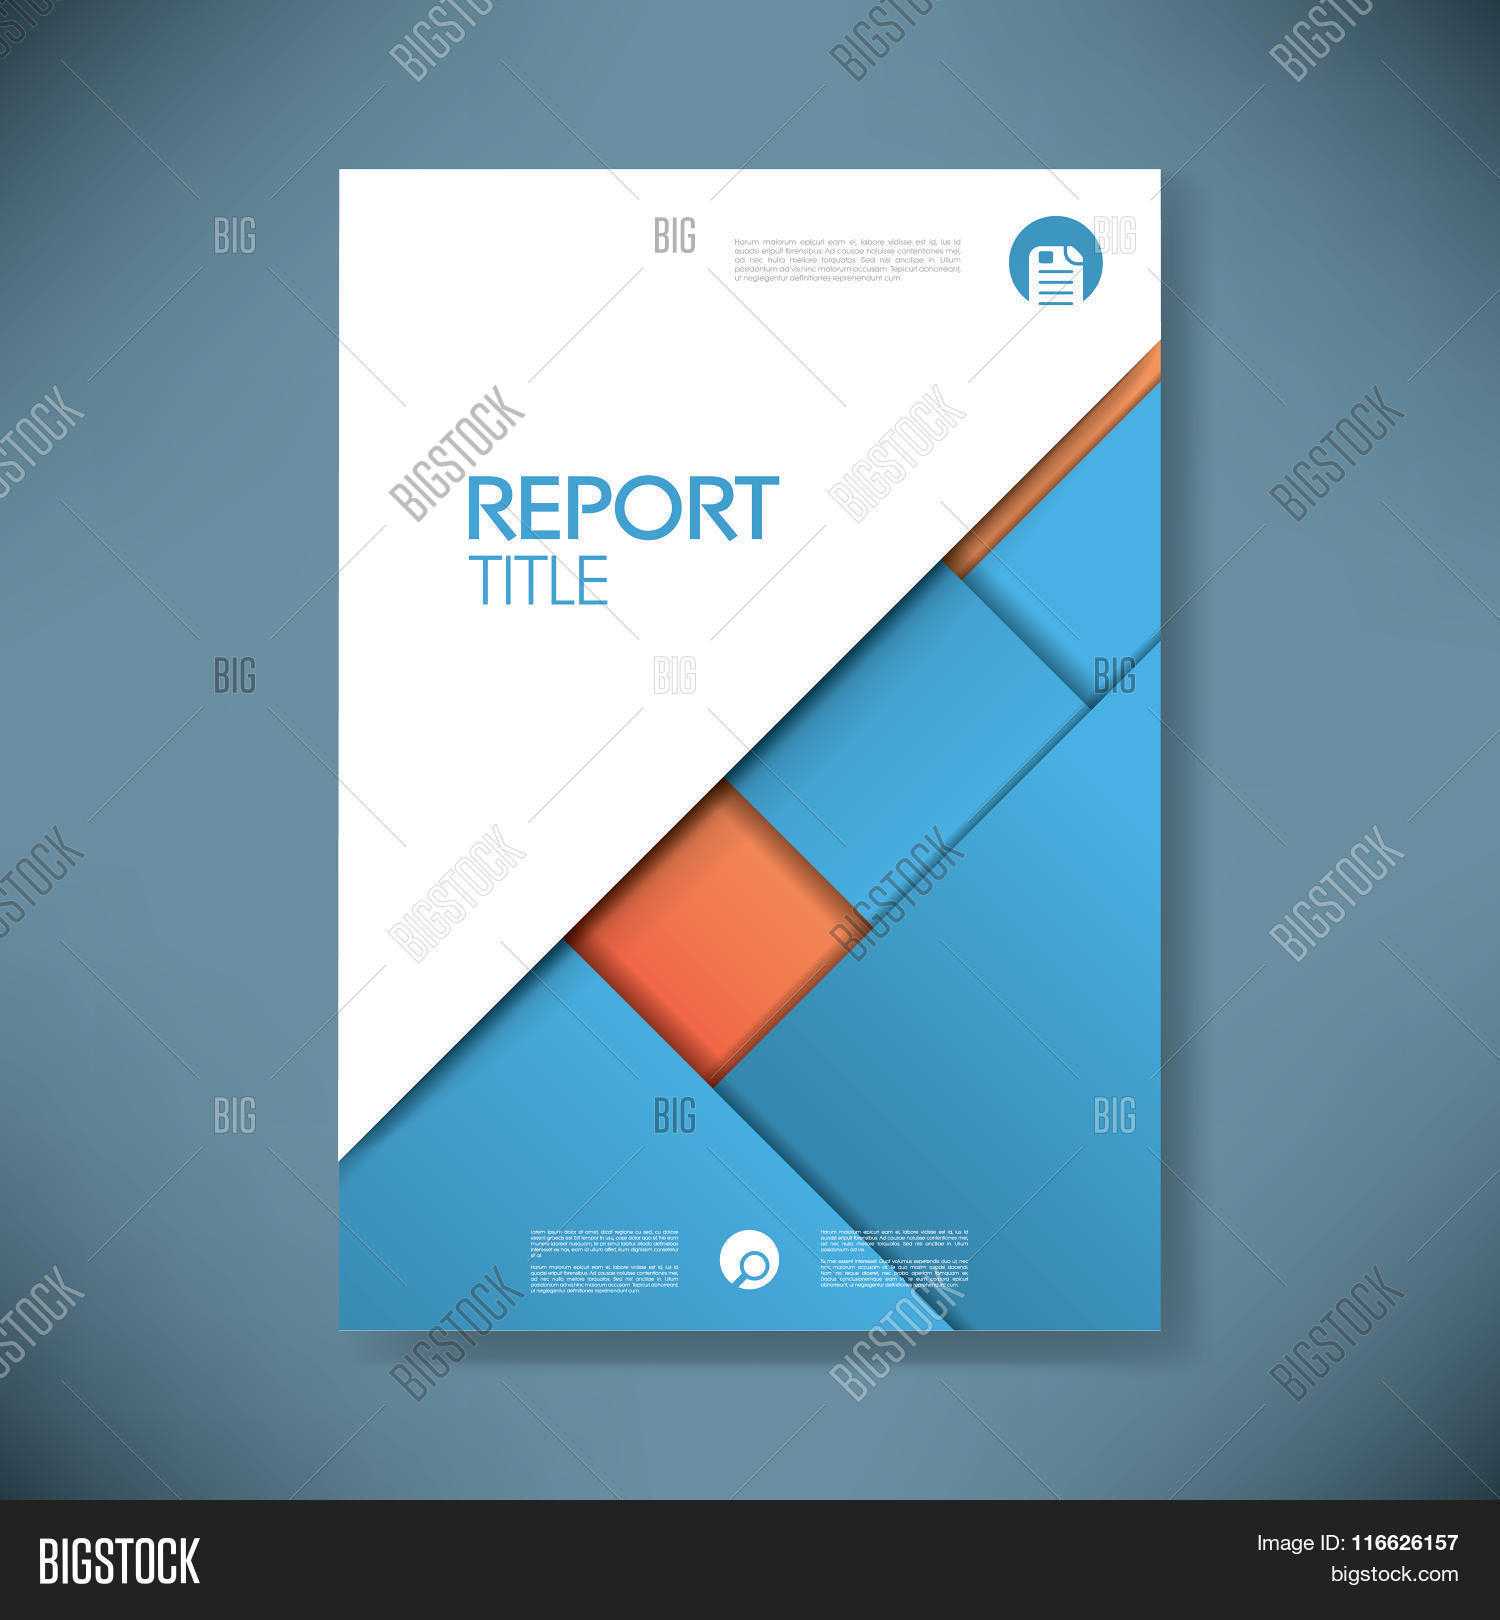 Business Report Cover Vector & Photo (Free Trial) | Bigstock Throughout Word Report Cover Page Template